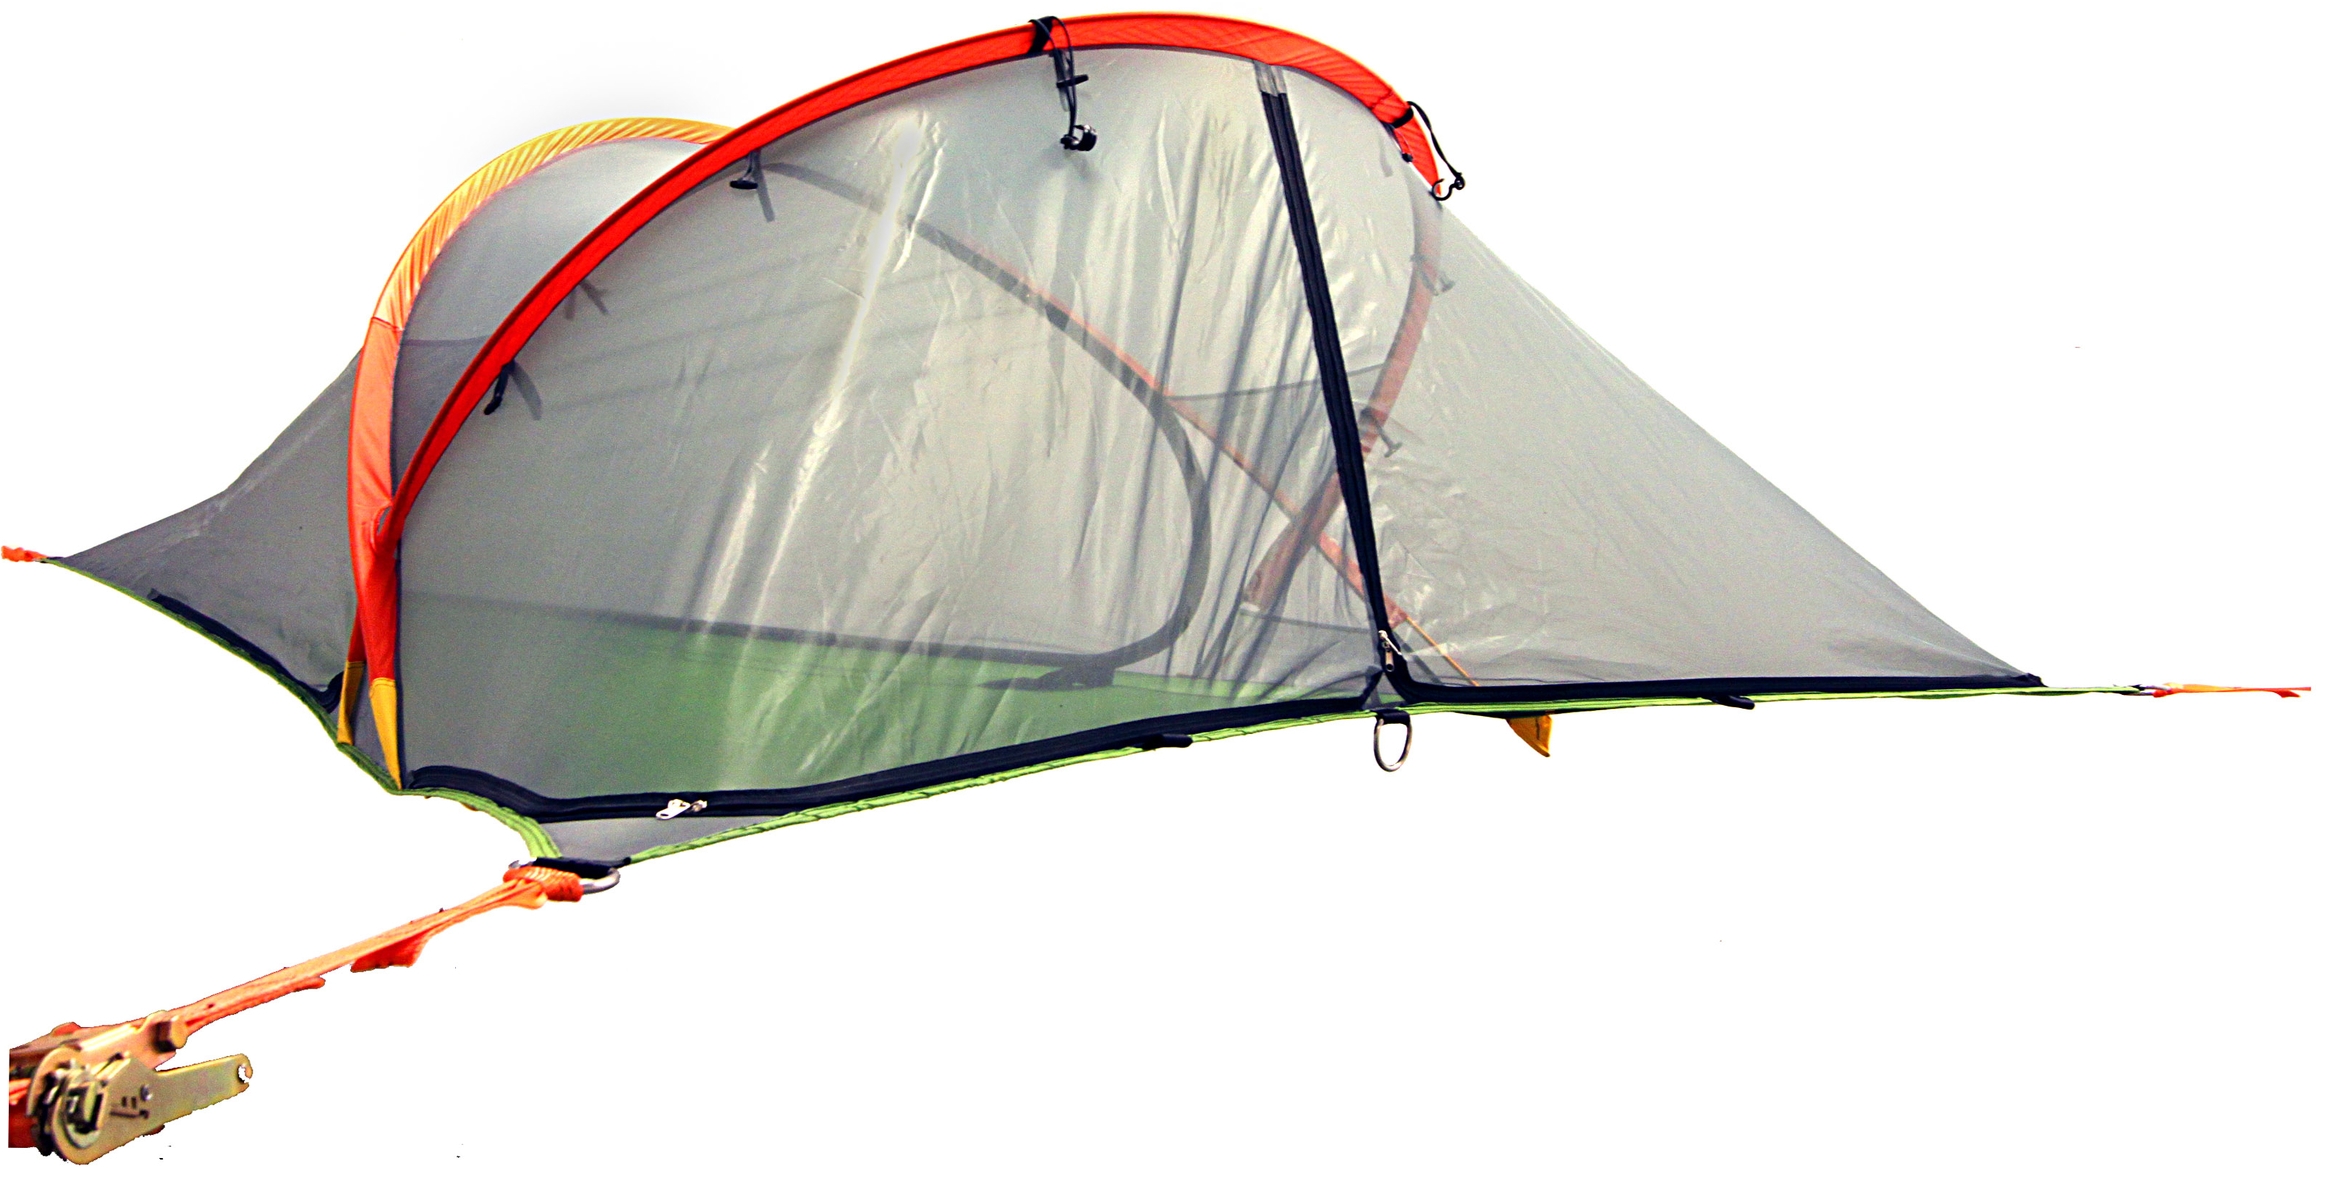 TENTSILE Connect Tree Tent, $495